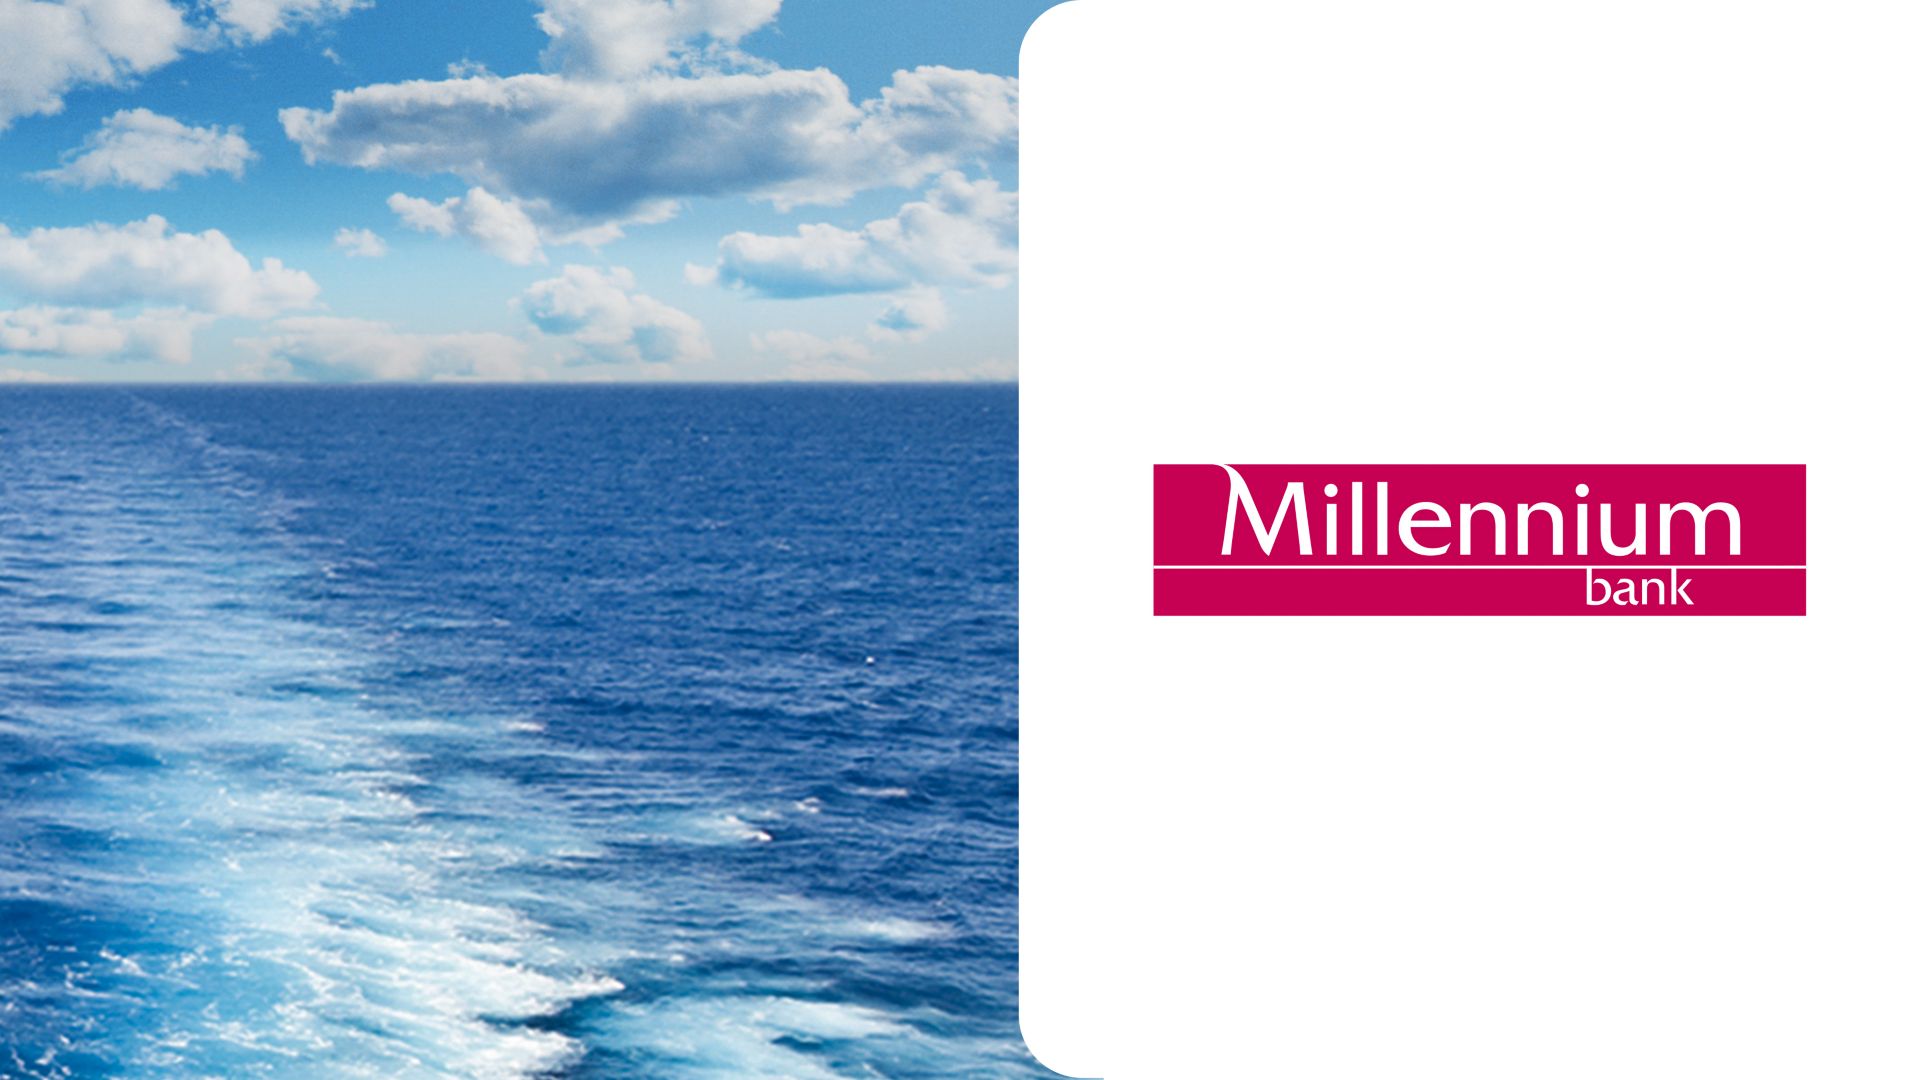 Special offers for Millennium bank members